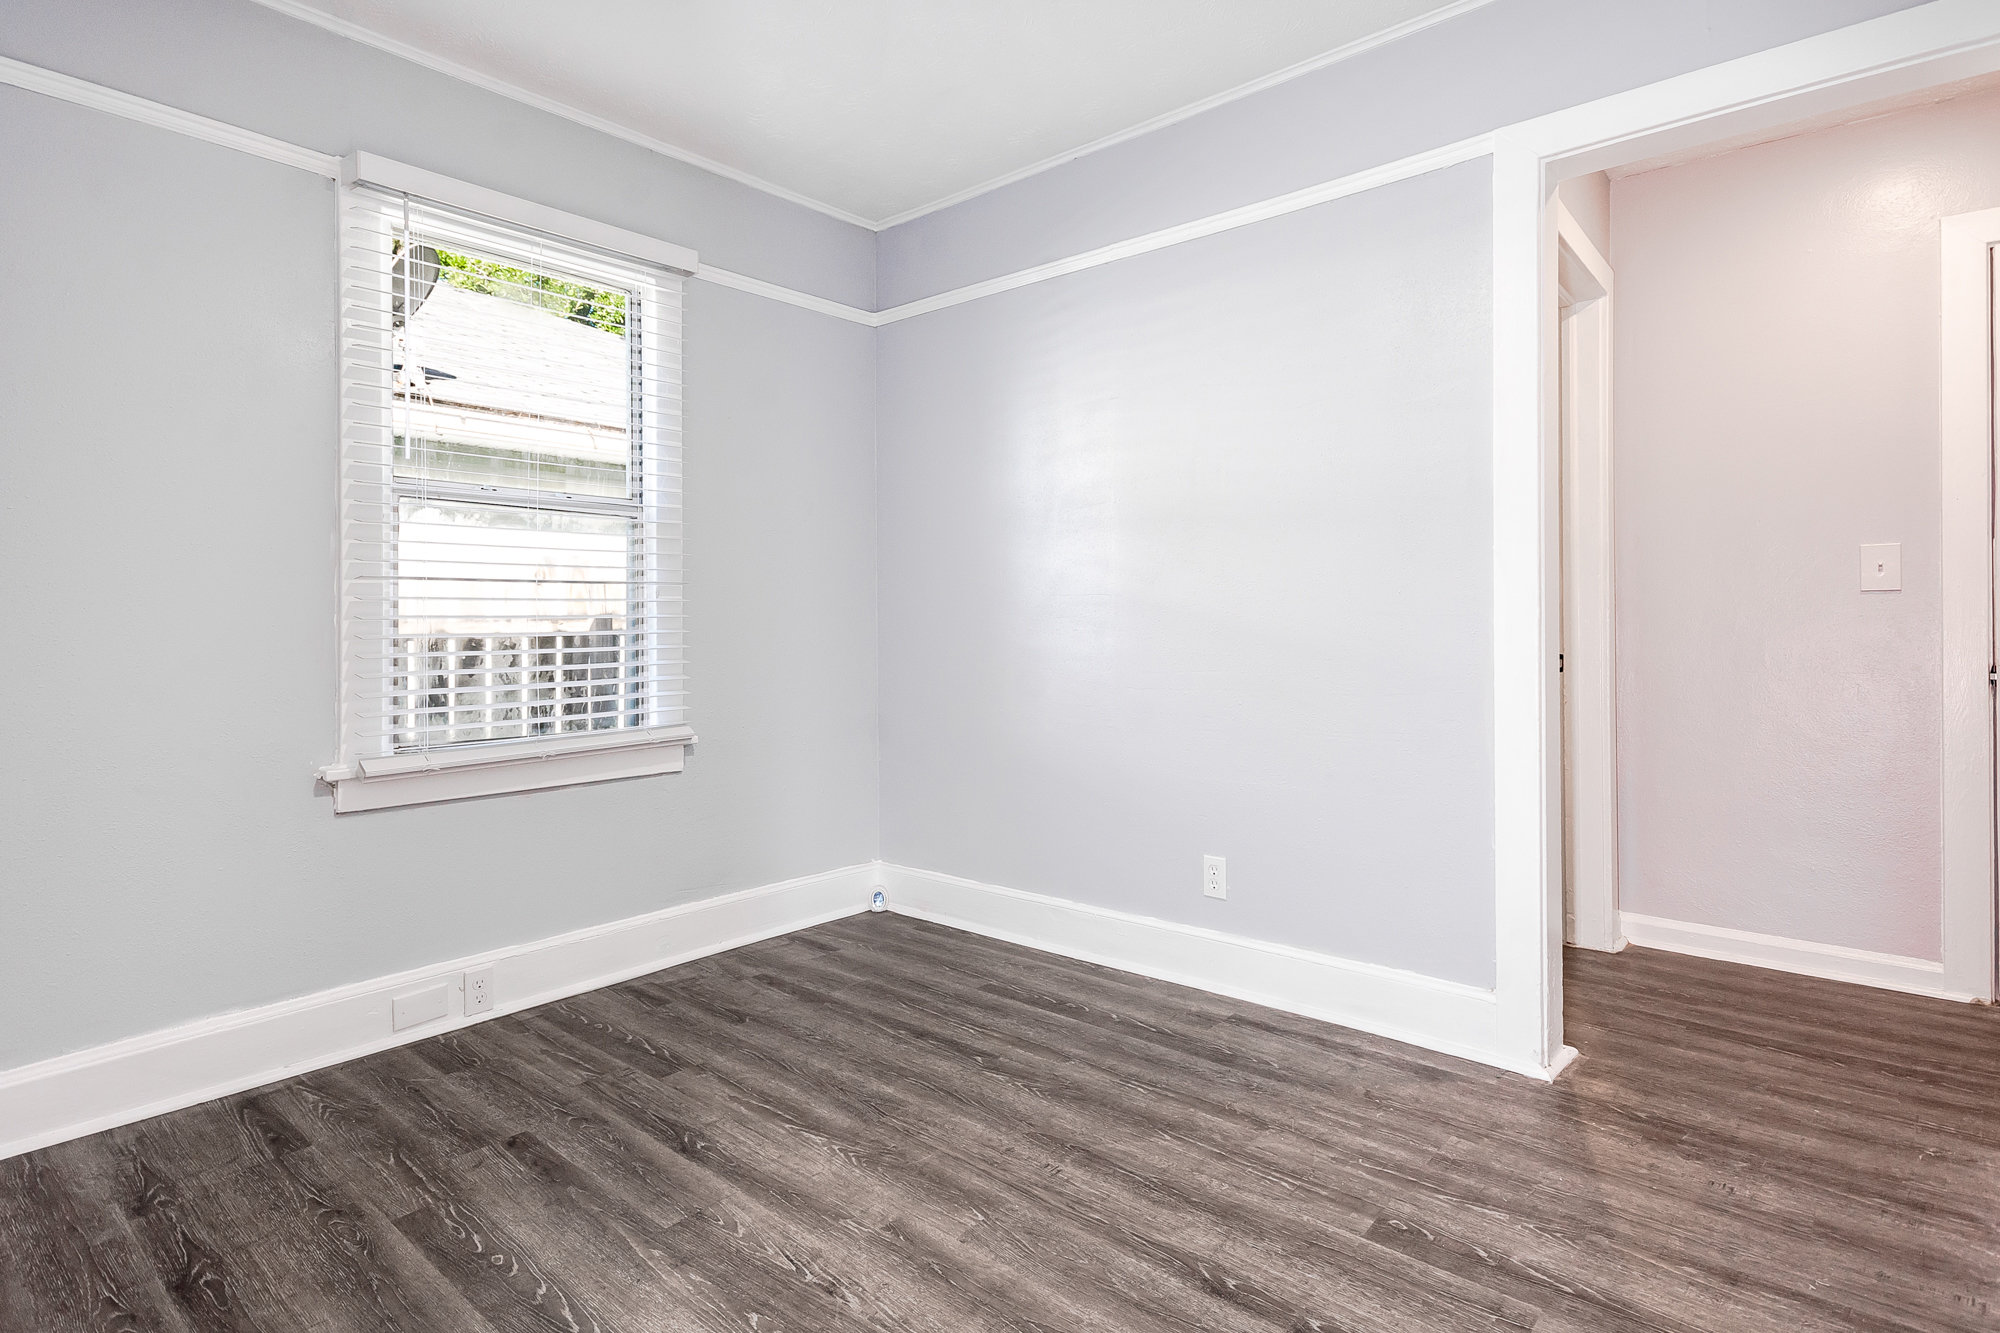 Bedroom with netural colors and updated floors